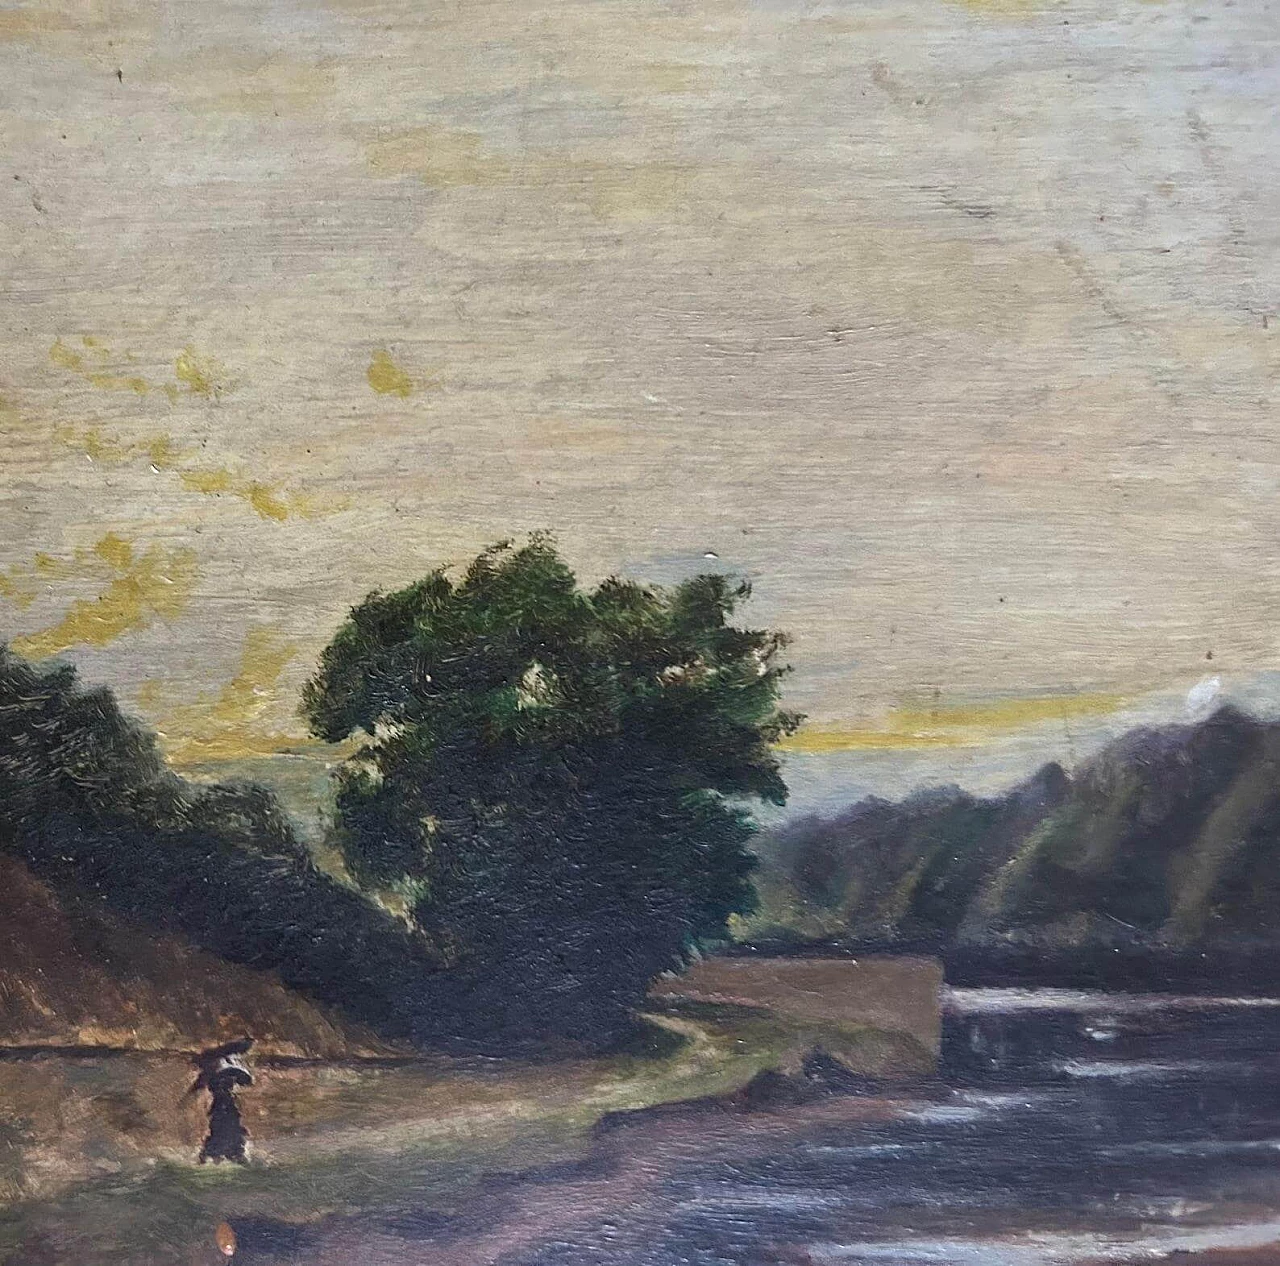 Lake landscape in the style of the Barbizon School, painting, 1920s 4